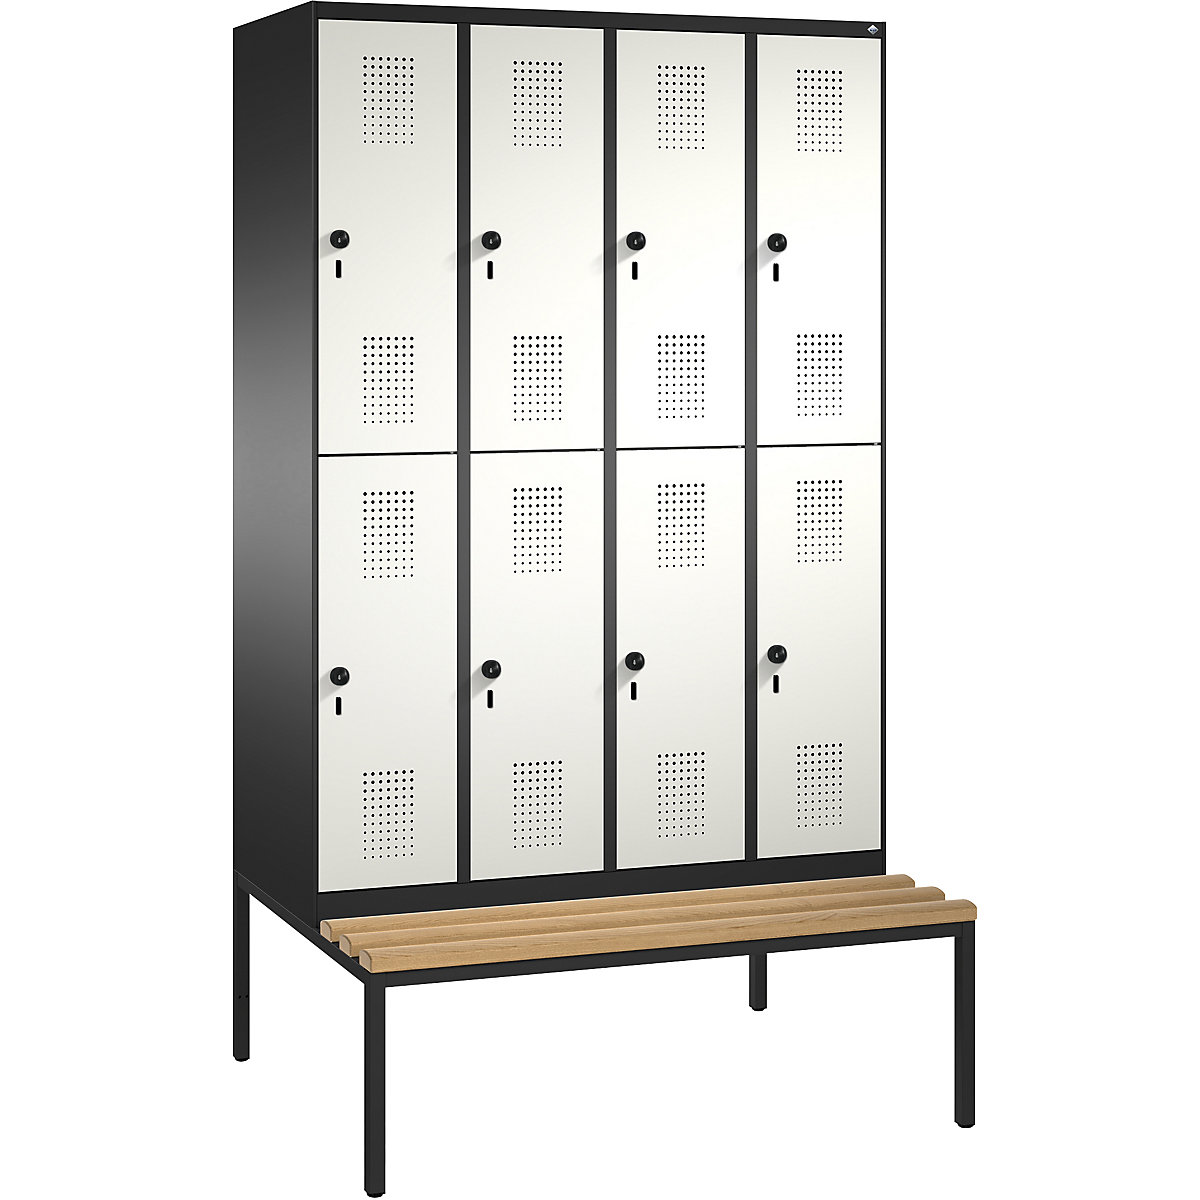 EVOLO cloakroom locker, double tier, with bench – C+P, 4 compartments, 2 shelf compartments each, compartment width 300 mm, black grey / pure white-2